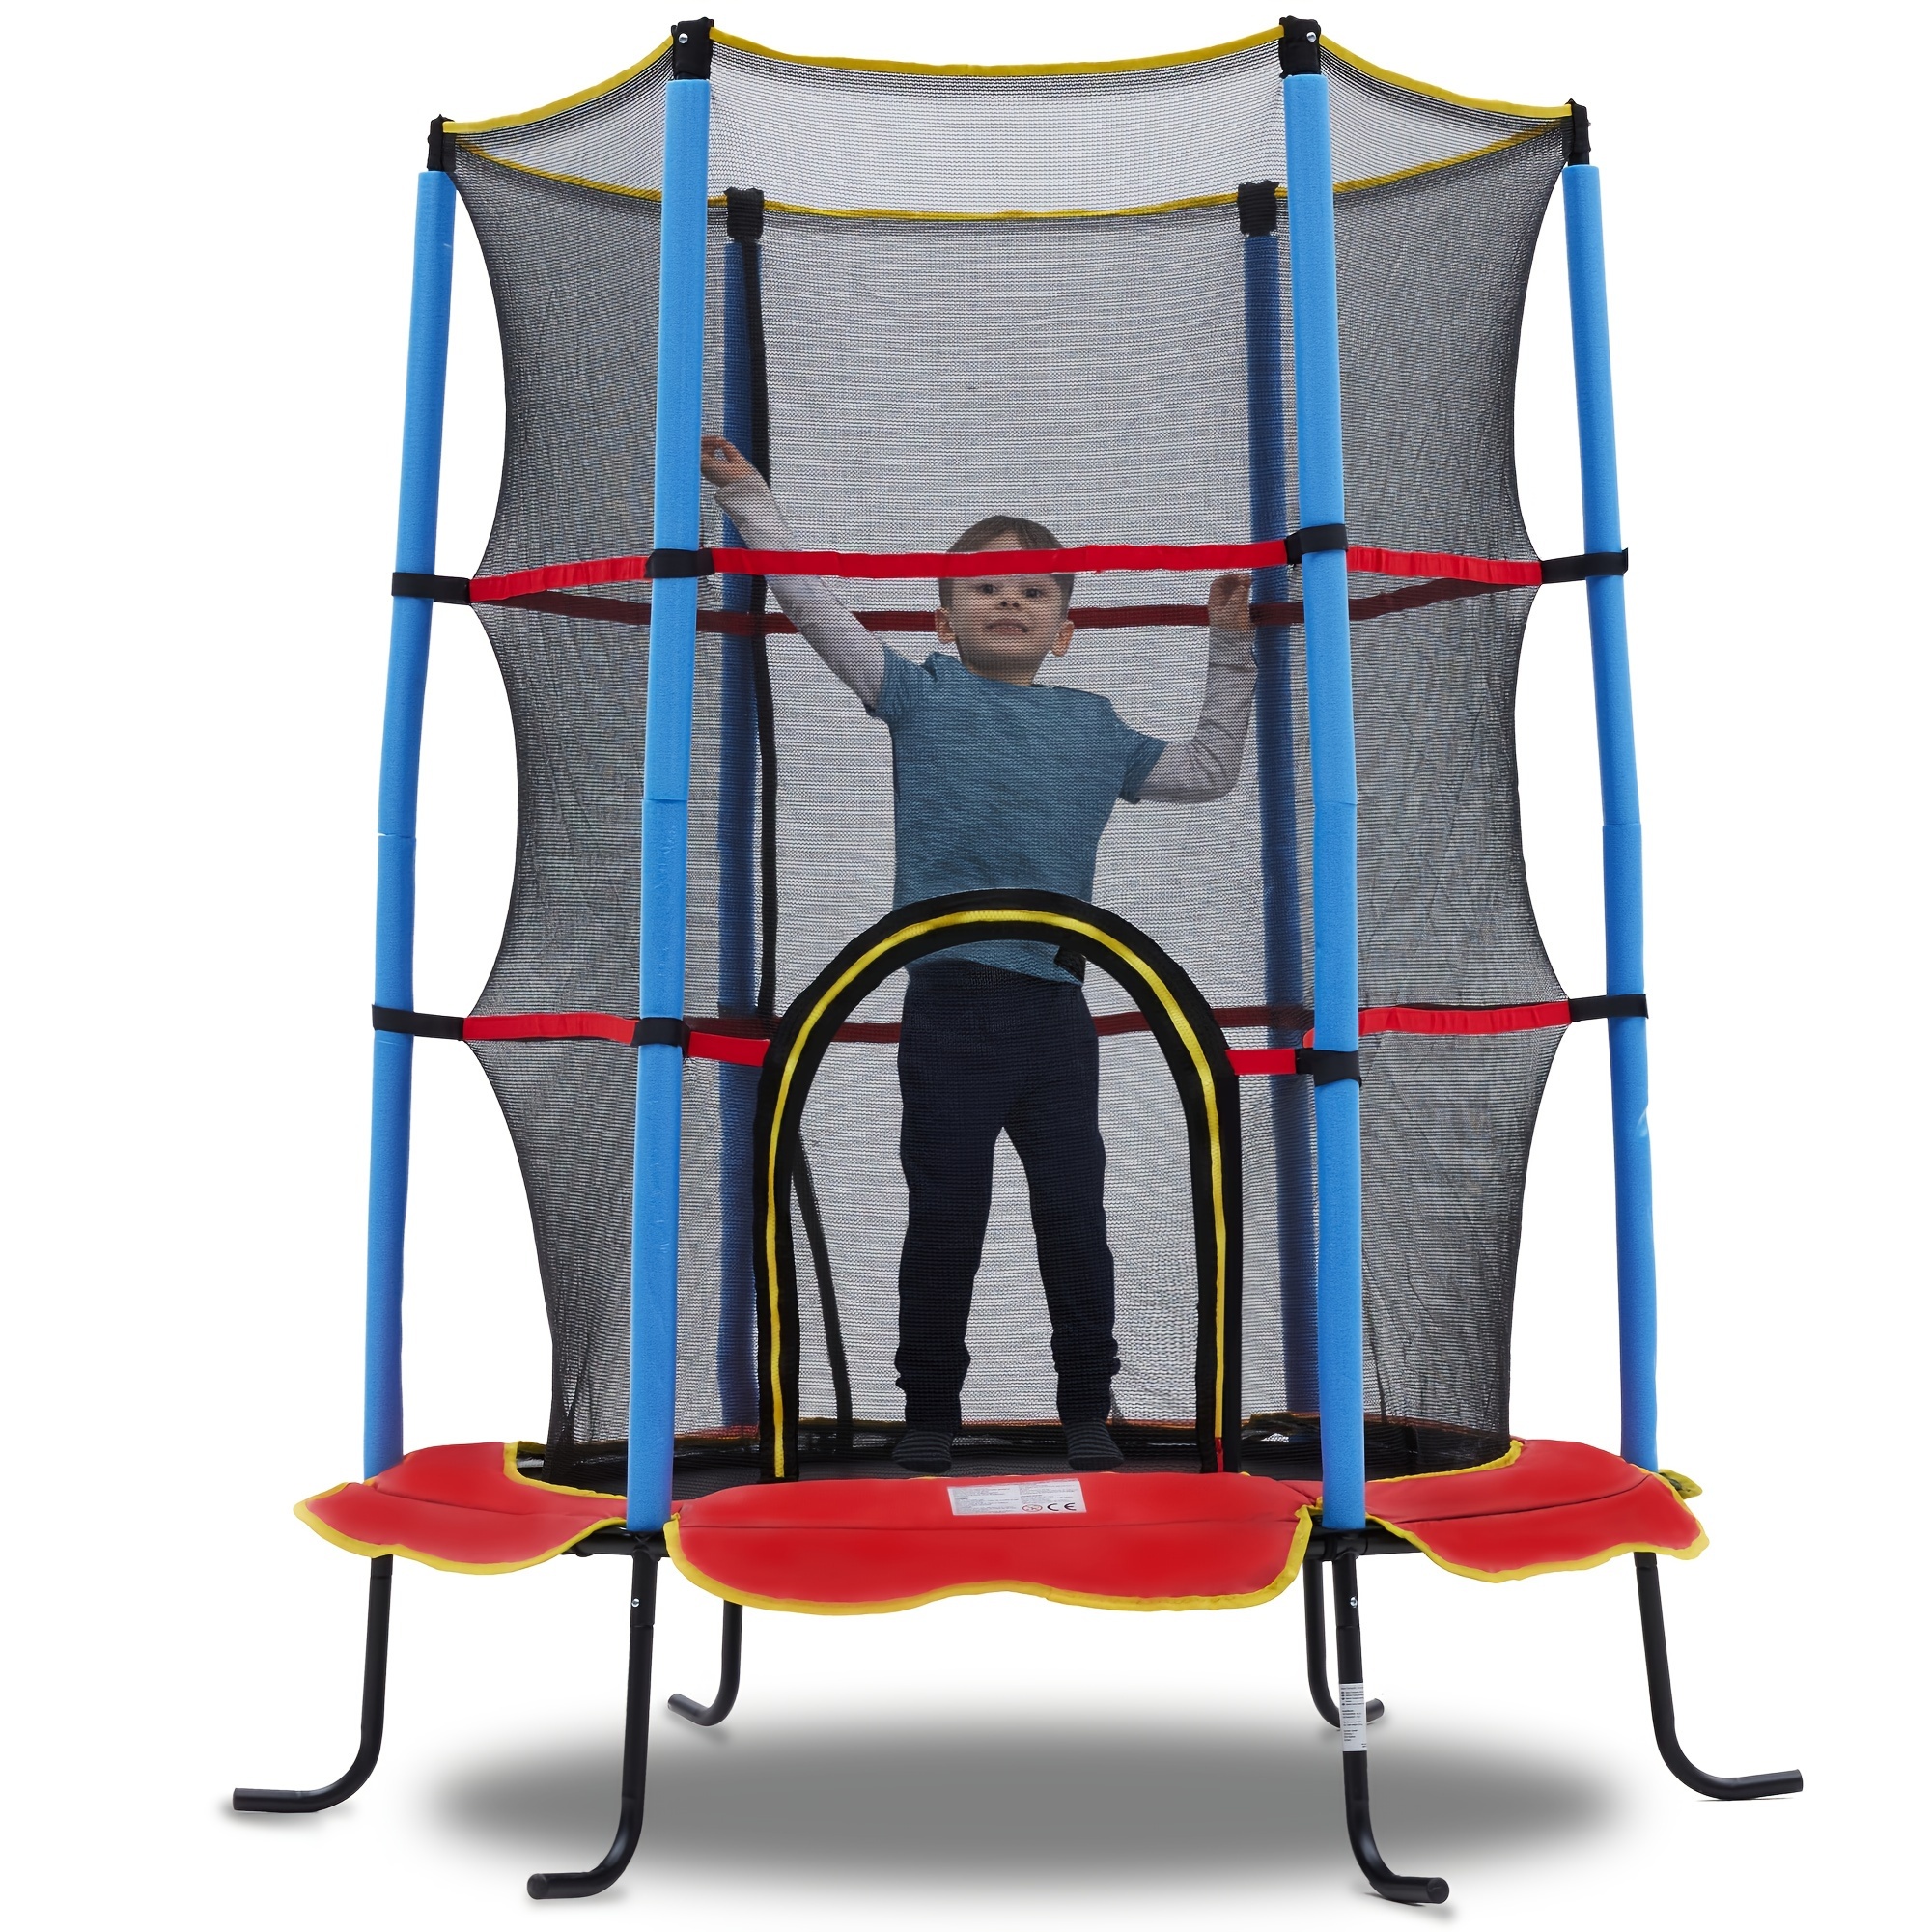 

55'' Mini Trampoline For Kids With Enclosure - Indoor Trampoline For Toddlers With Protective Net And Safety Pad - Double-sided Zipper Design For Easy Self-entrance - Red